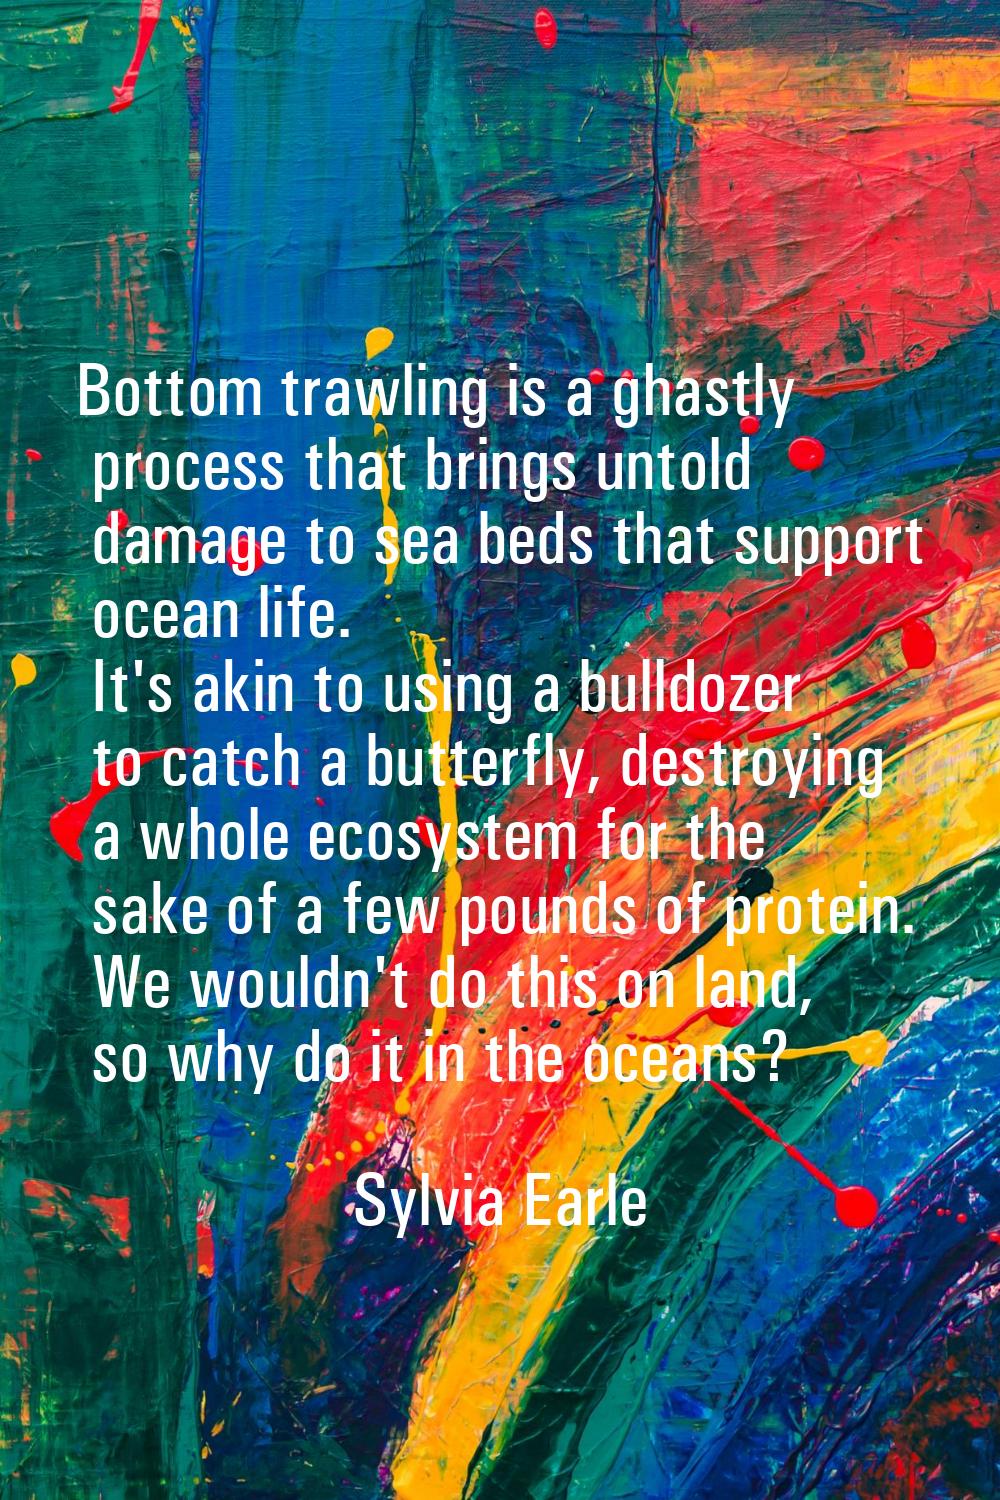 Bottom trawling is a ghastly process that brings untold damage to sea beds that support ocean life.